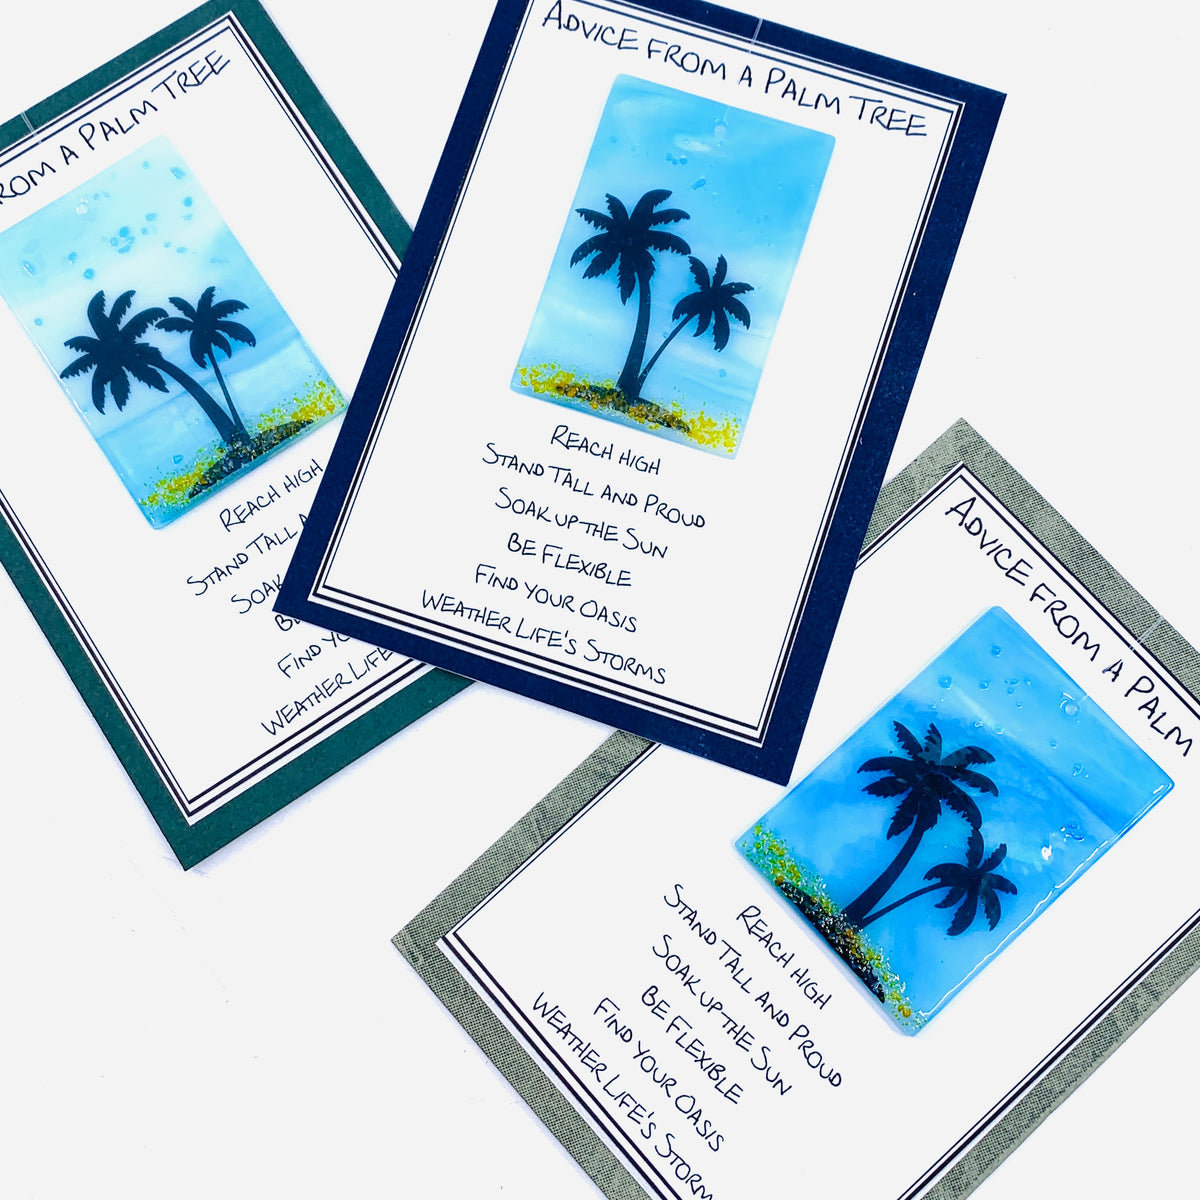 Fused Glass Advice From a Palm Tree 1